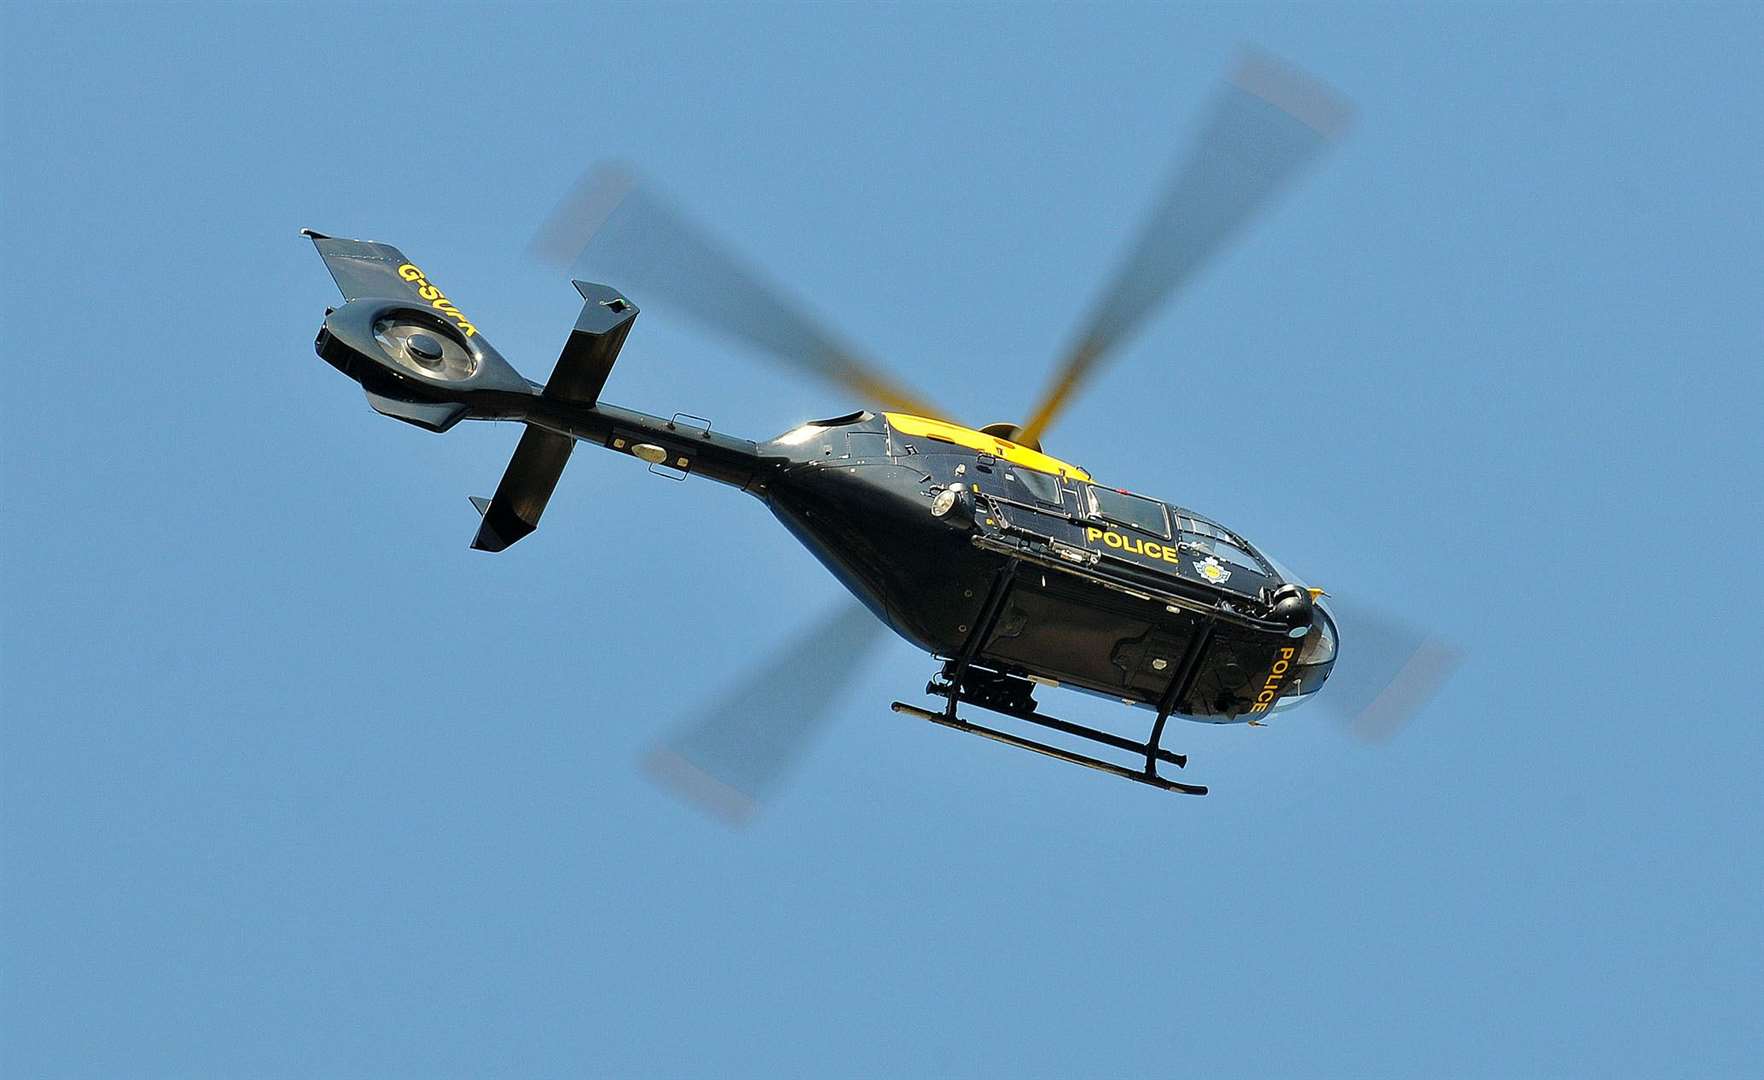 The police helicopter was over Maidstone this morning